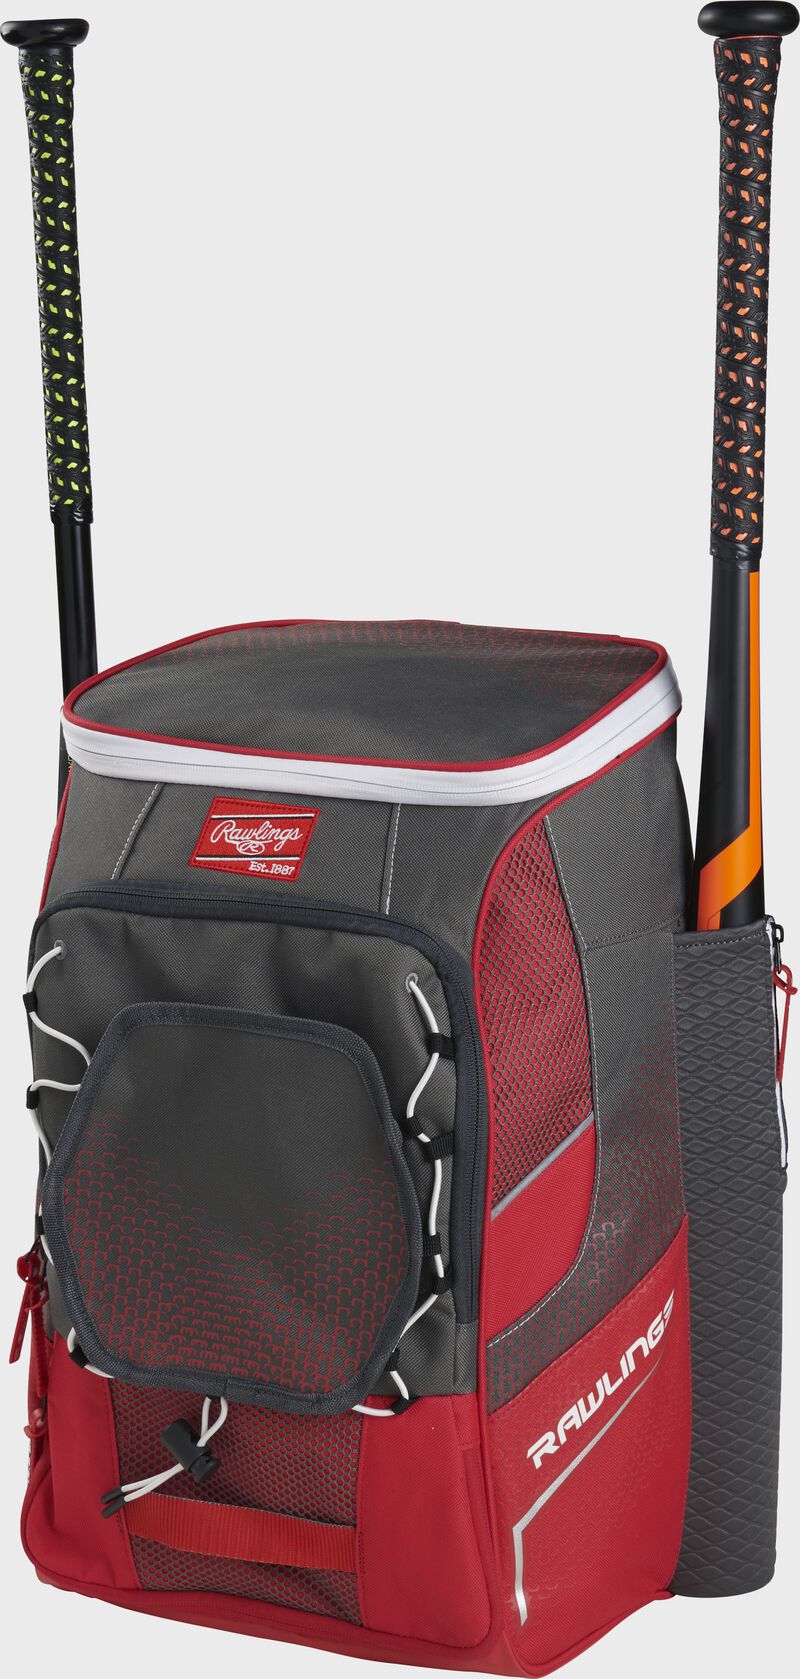 Front right angle view of a scarlet Impulse backpack with two bats in the side sleeves - SKU: IMPLSE-S